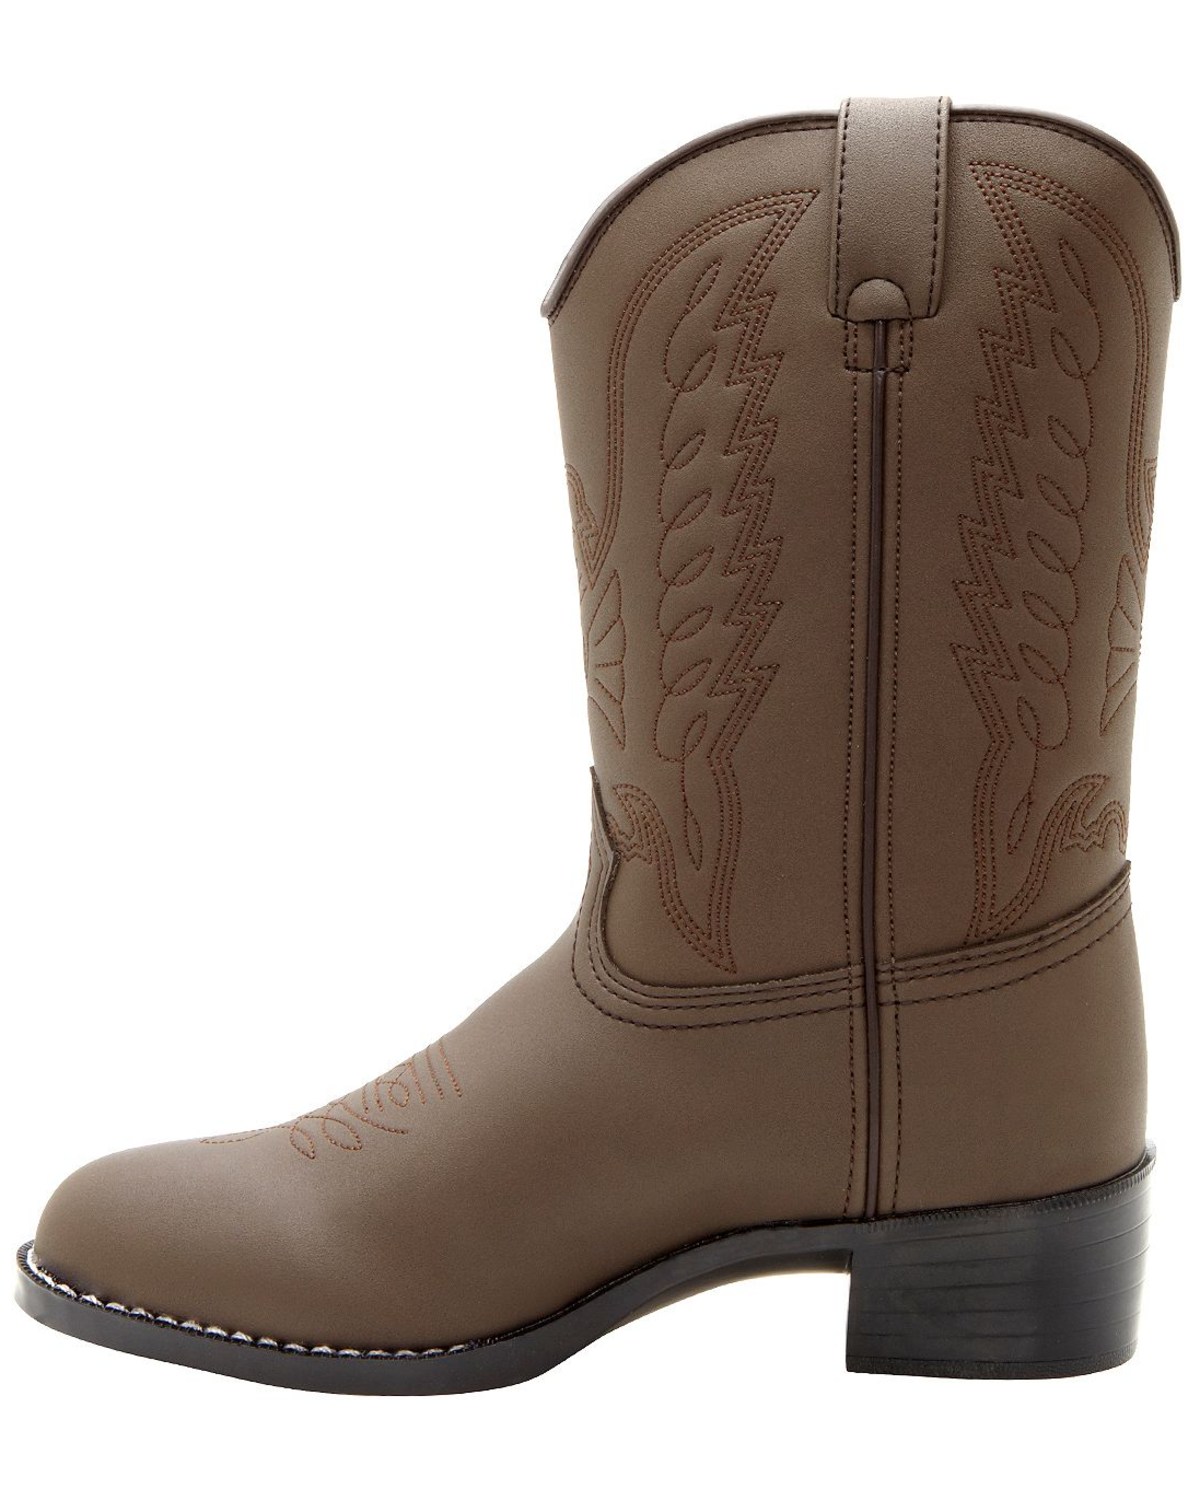 Durango Kid's Distressed Leather Western Boots | Boot Barn